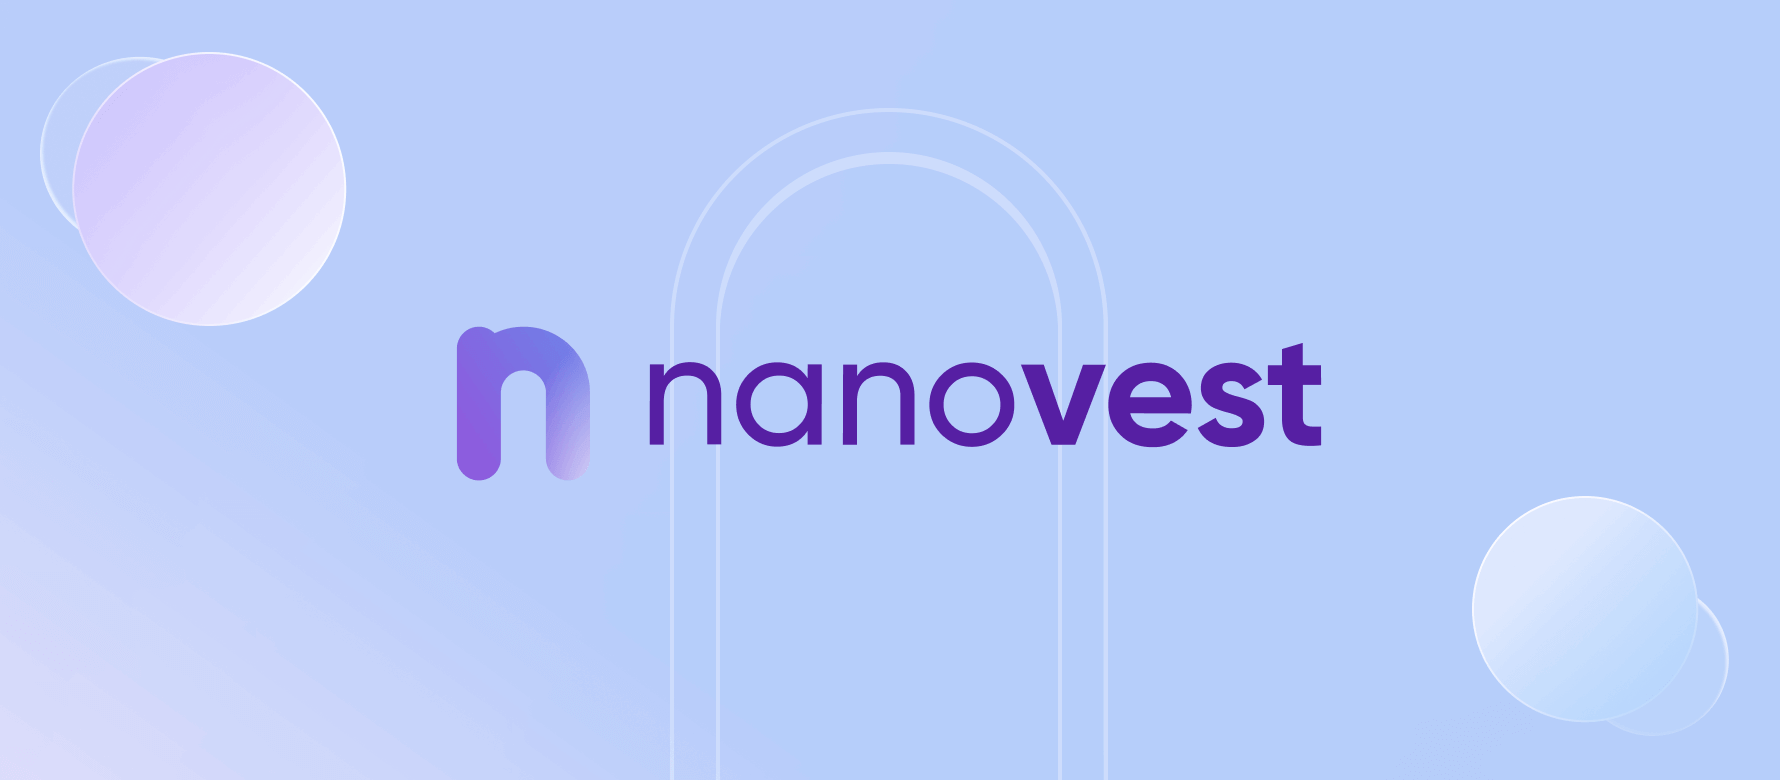 Case Study | App screen design of Nanovest, a feature-rich FinTech app for cryptocurrency, stock market investment, and money transfer in Indonesia.